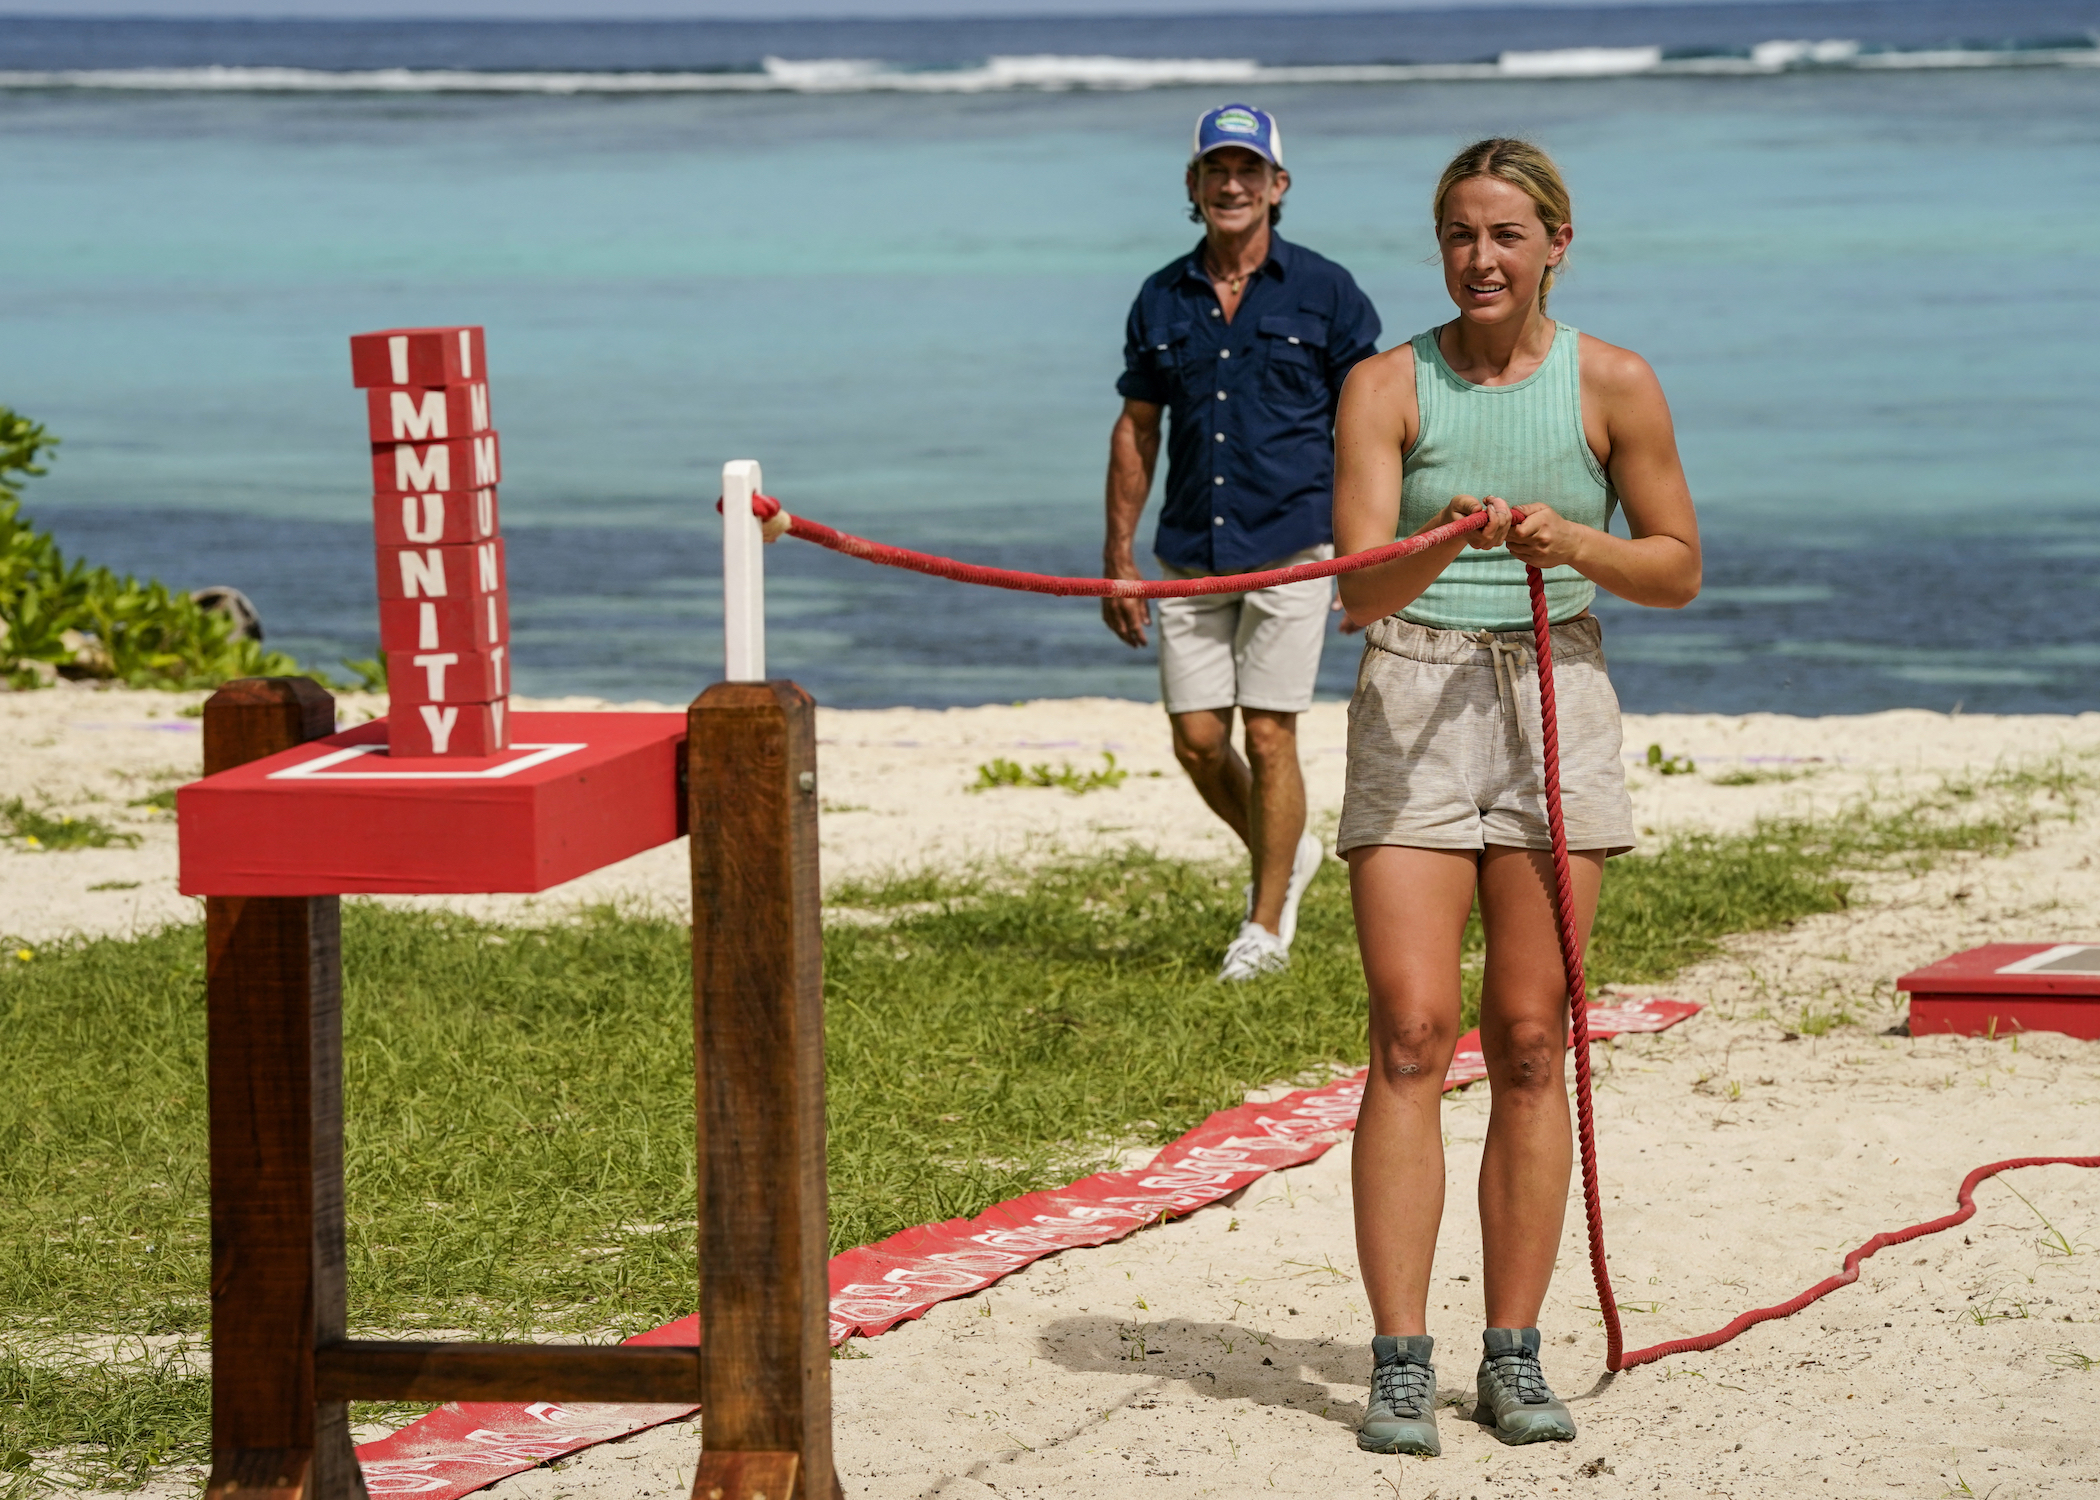 Tori holding a rope competing in an elimination with Jeff Probst behind her in 'Survivor' Season 42 Episode 6/7